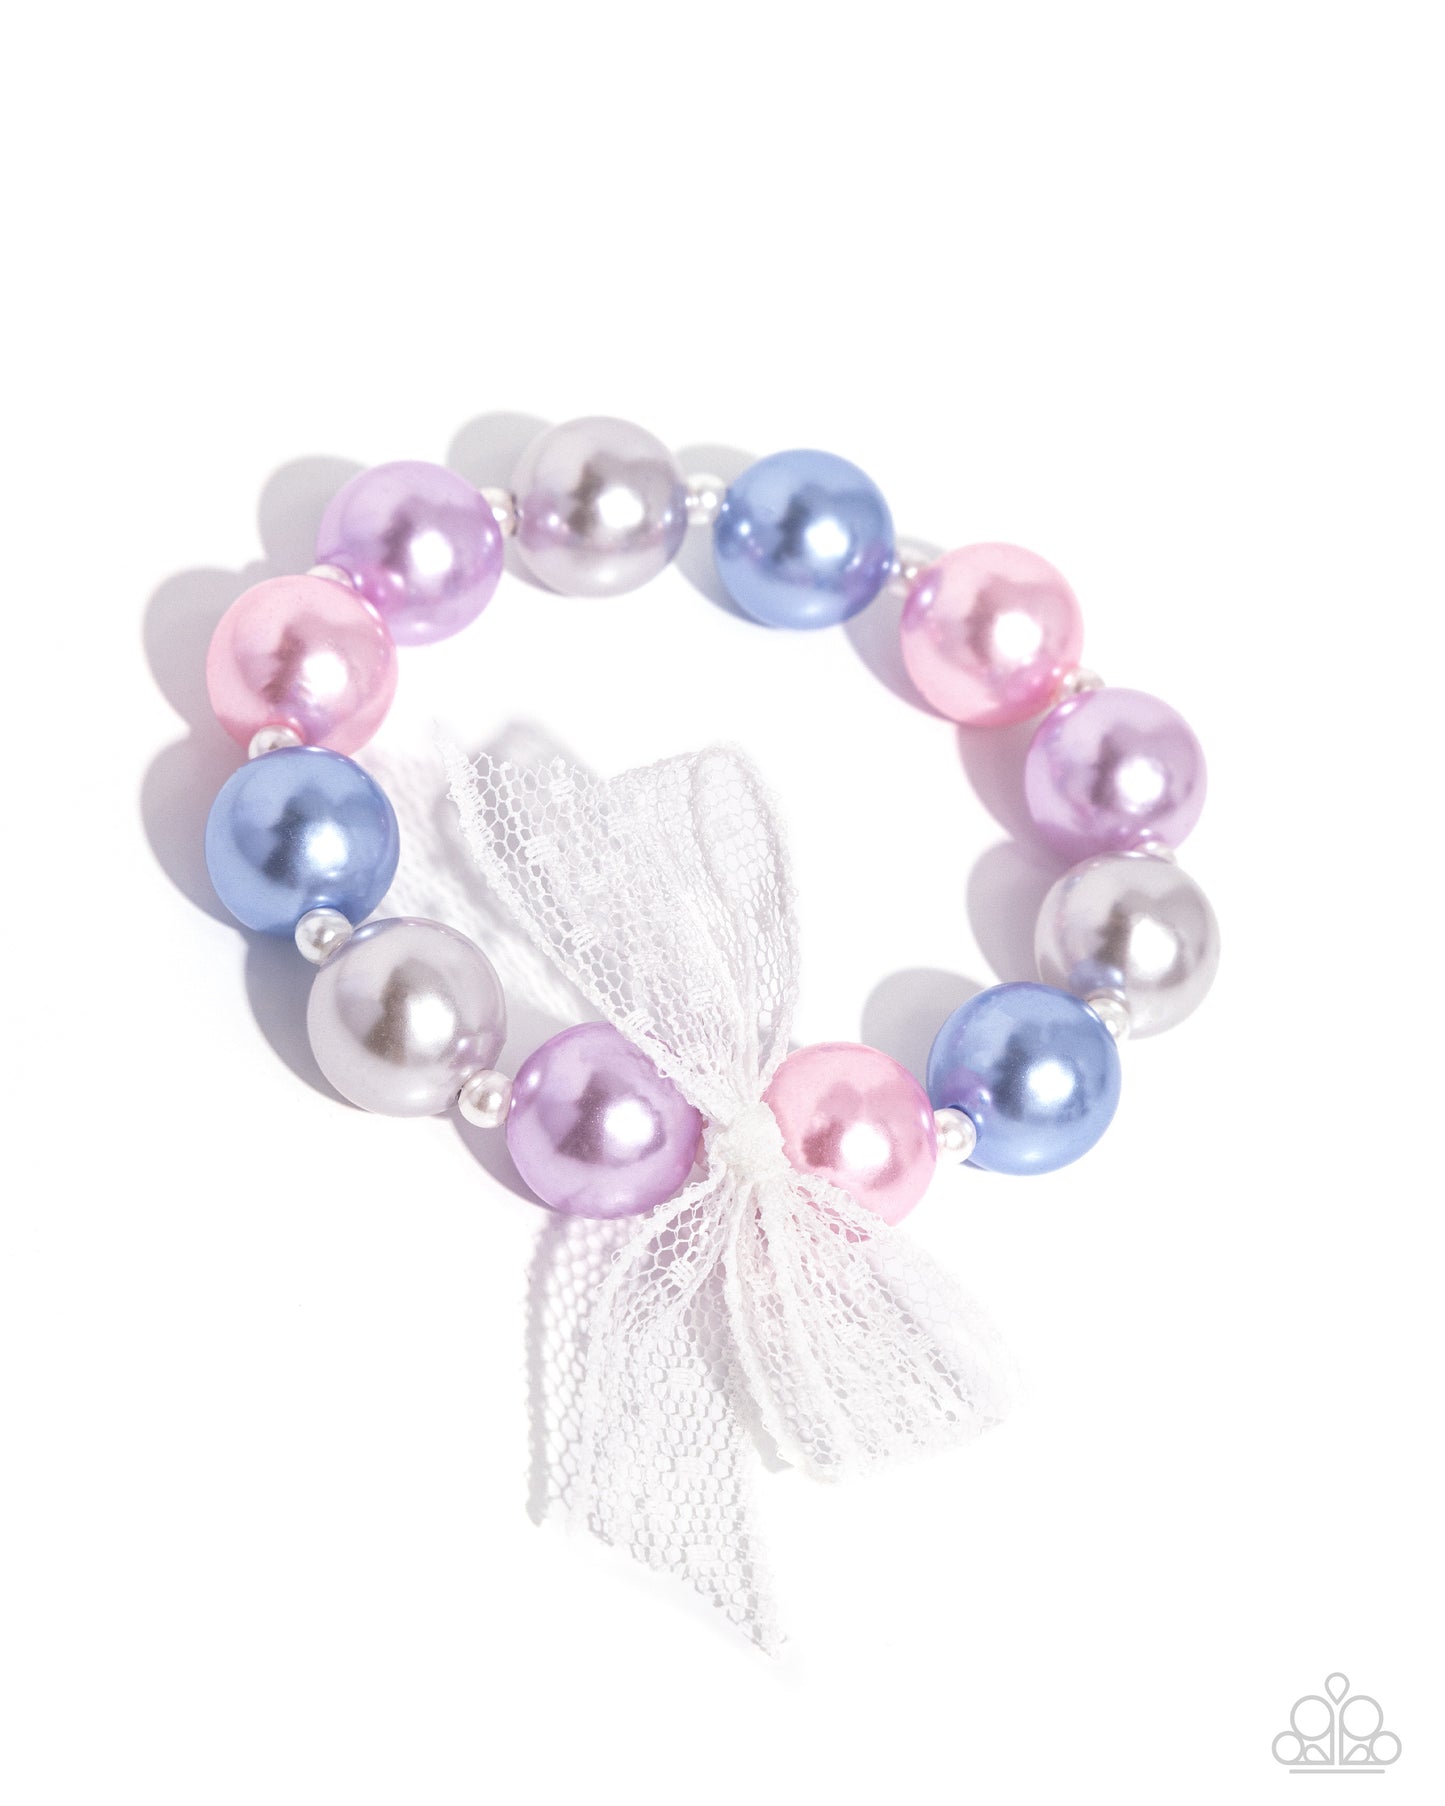 Girly Glam Multi Pearl Stretch Bracelet - Paparazzi Accessories Strung along an elastic stretchy band, a collection of glossy colorful pearls alternate with dainty white pearls along the wrist. An airy, chiffon white ribbon is tied in the center of the pearls for a refined finish. This bracelet would be the perfect accessory for a gender reveal or for a mom with boys and girls! Sold as one individual bracelet. SKU: P9RE-MTXX-162VV Get The Complete Look! Earring: "Elegance Ease - Multi" (Sold Separately)